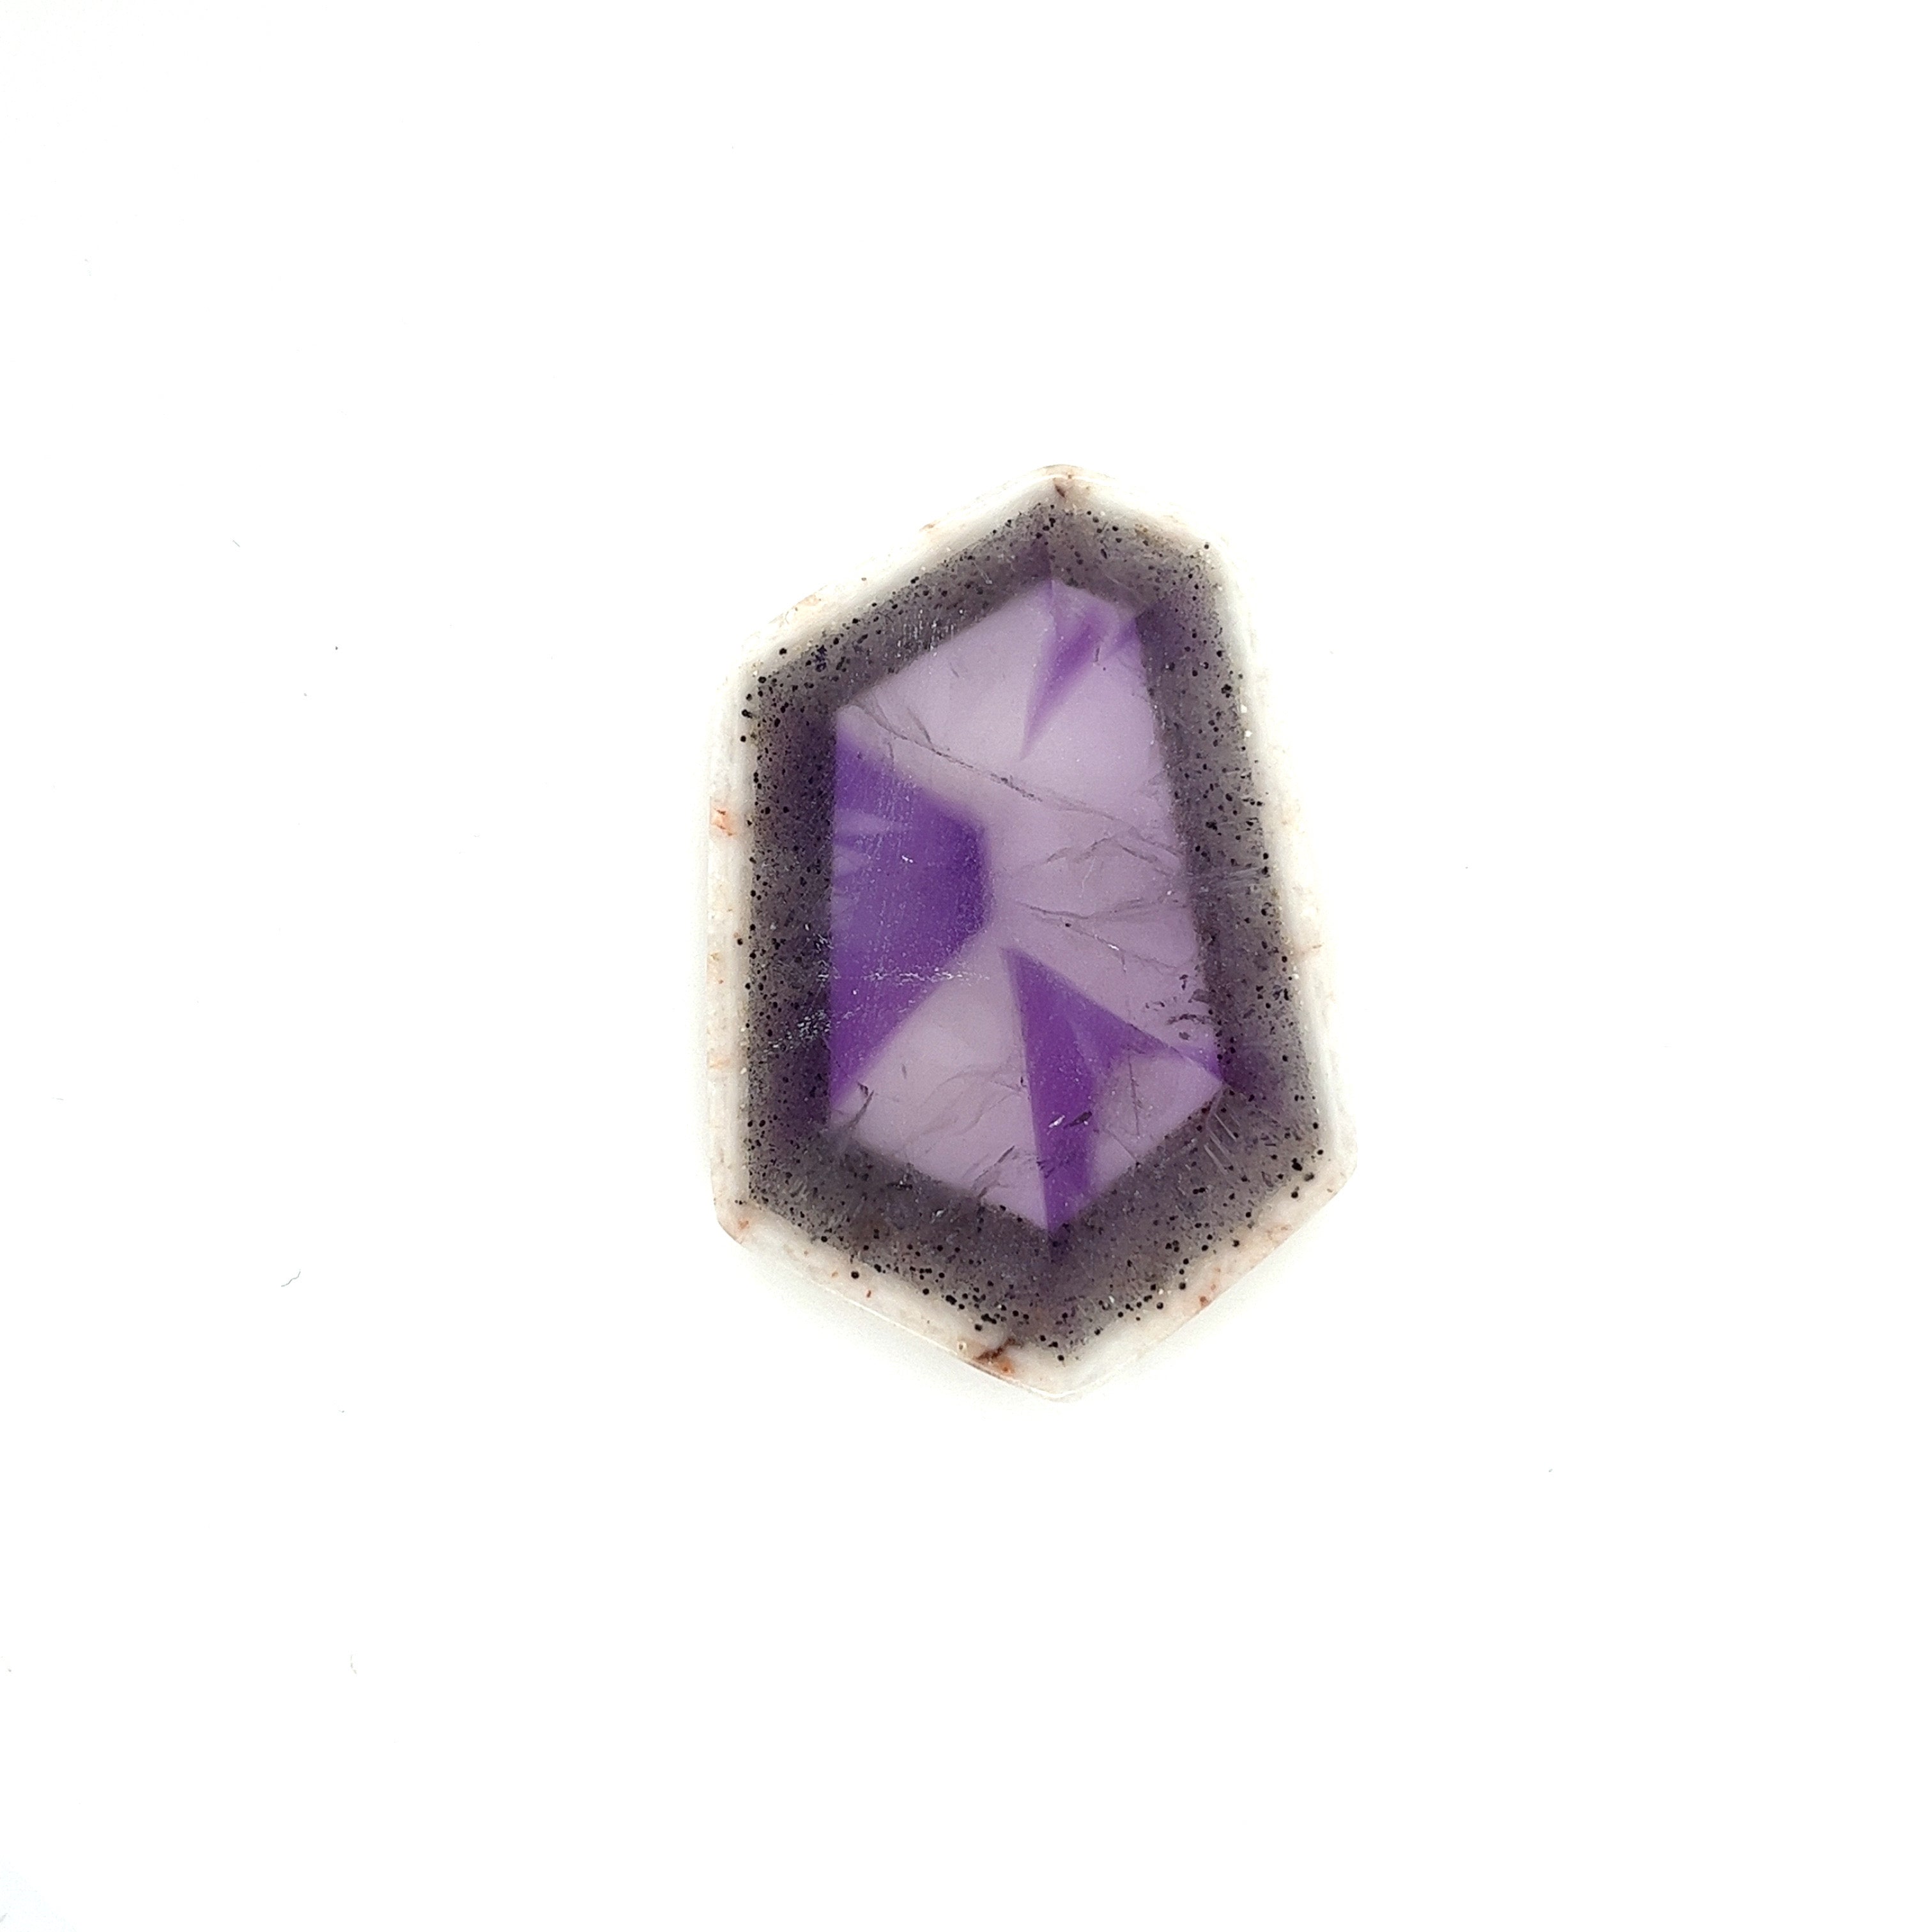 Trapiche Amethyst; Natural Untreated India Amethyst Slice, 14grams - Mark Oliver Gems